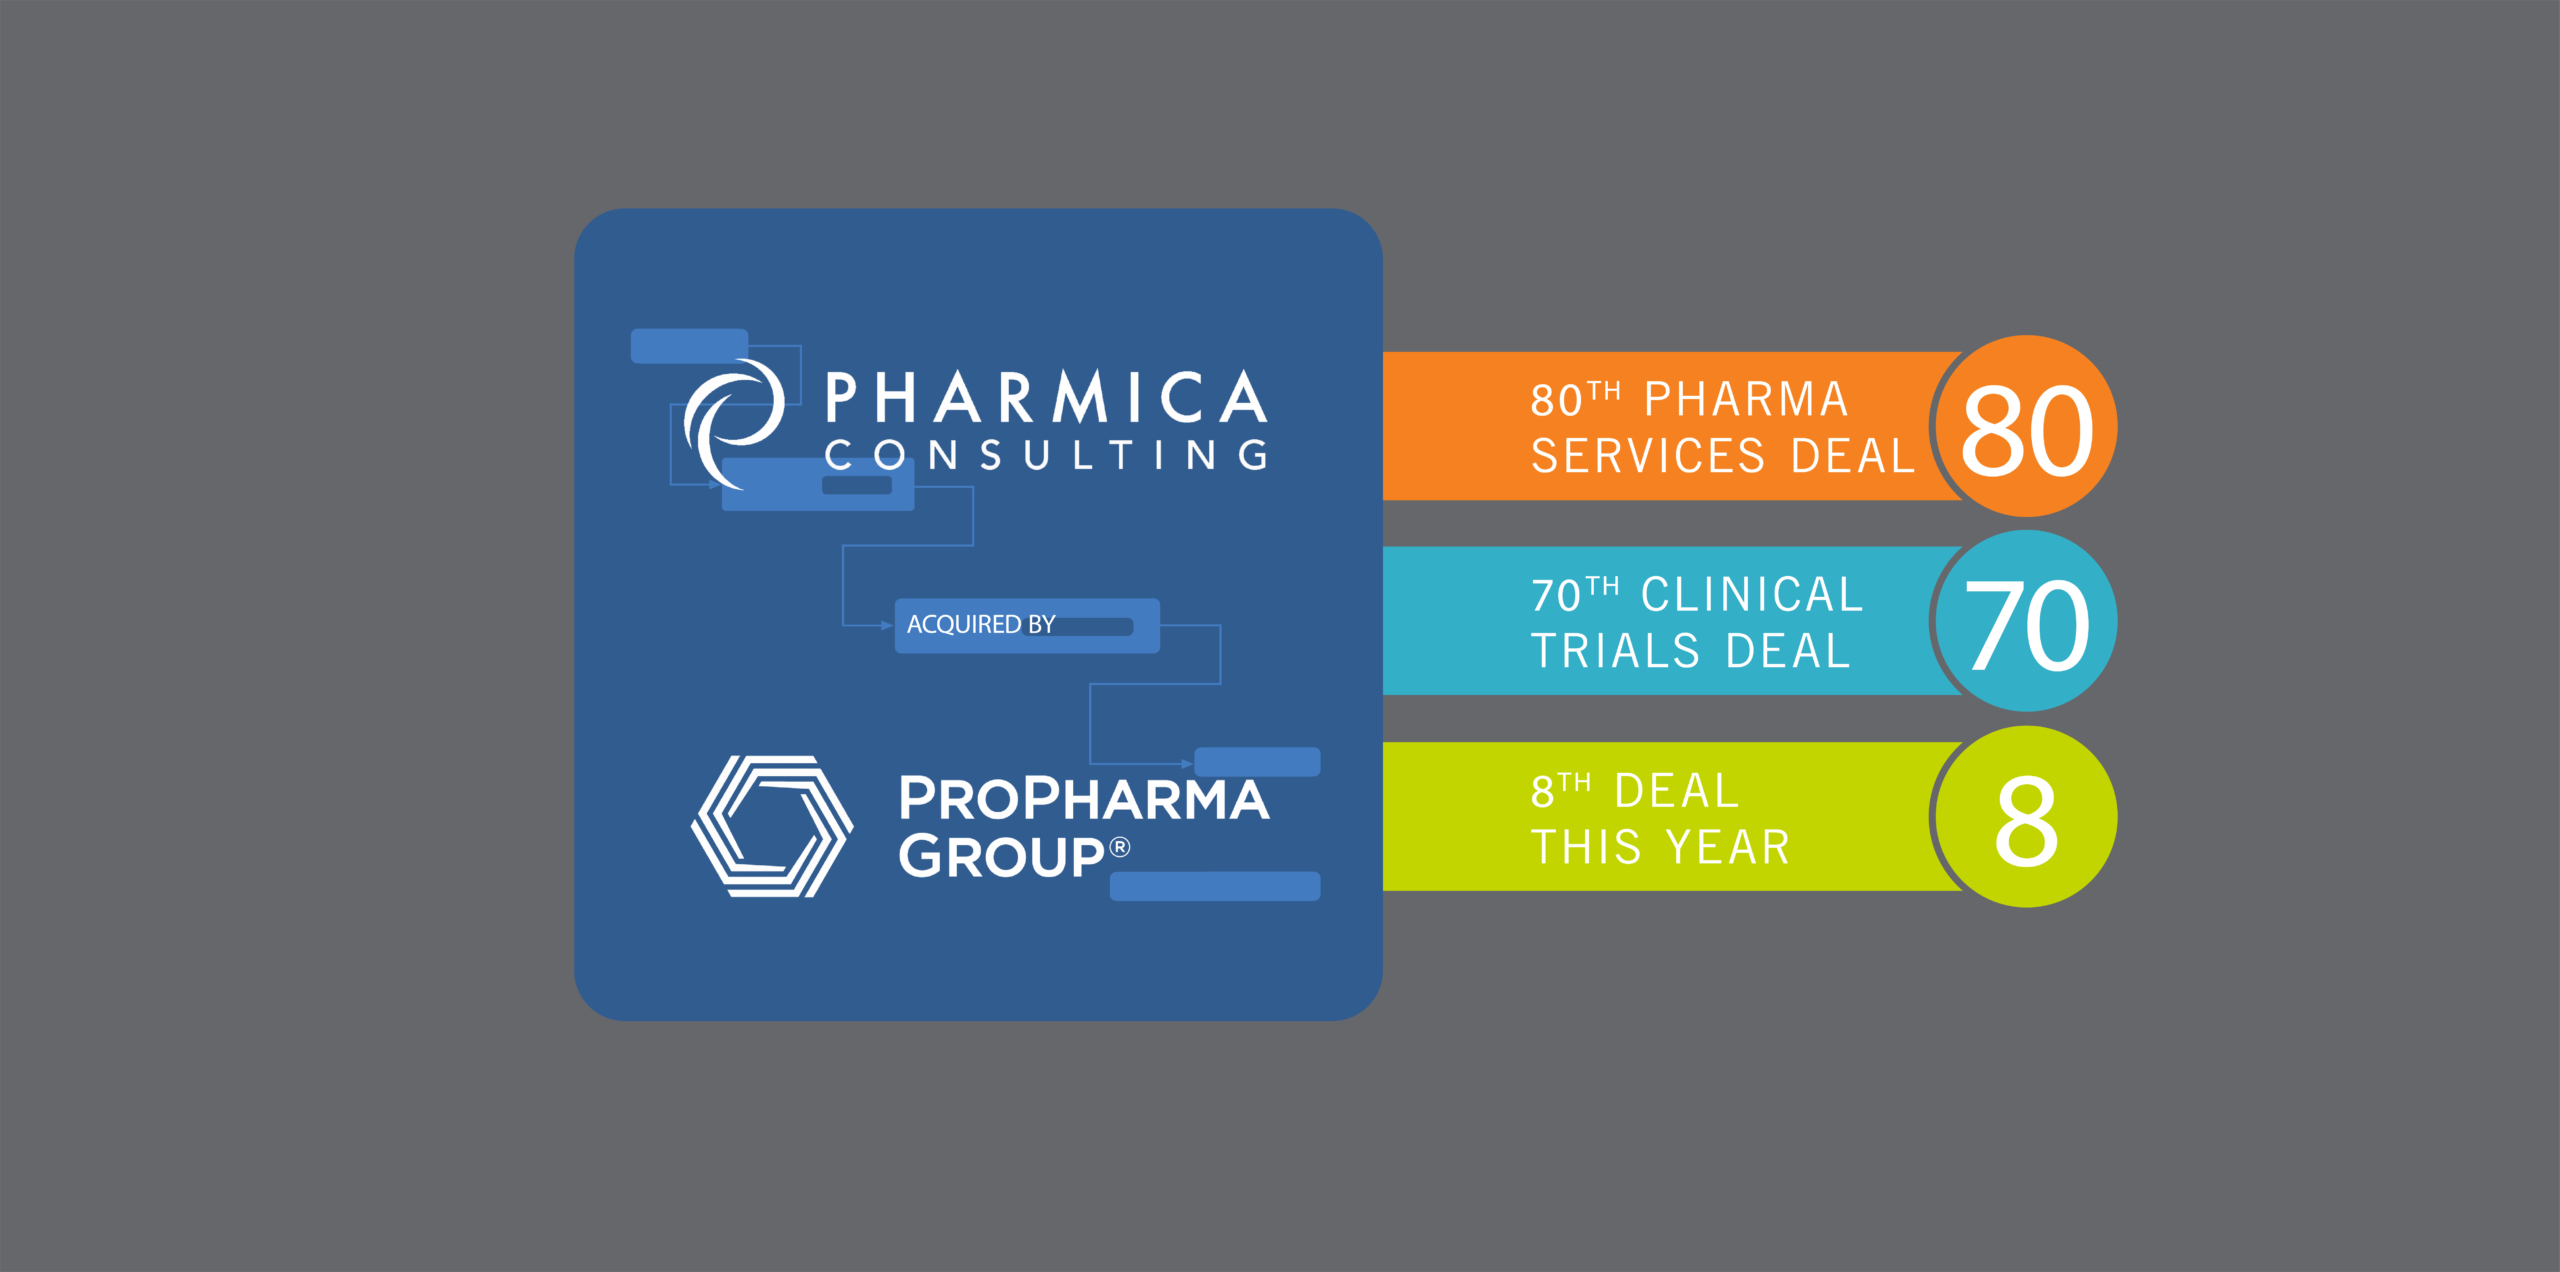 Pharmica Consulting Acquired by ProPharma Group to Provide Holistic Clinical Trial Execution Expertise